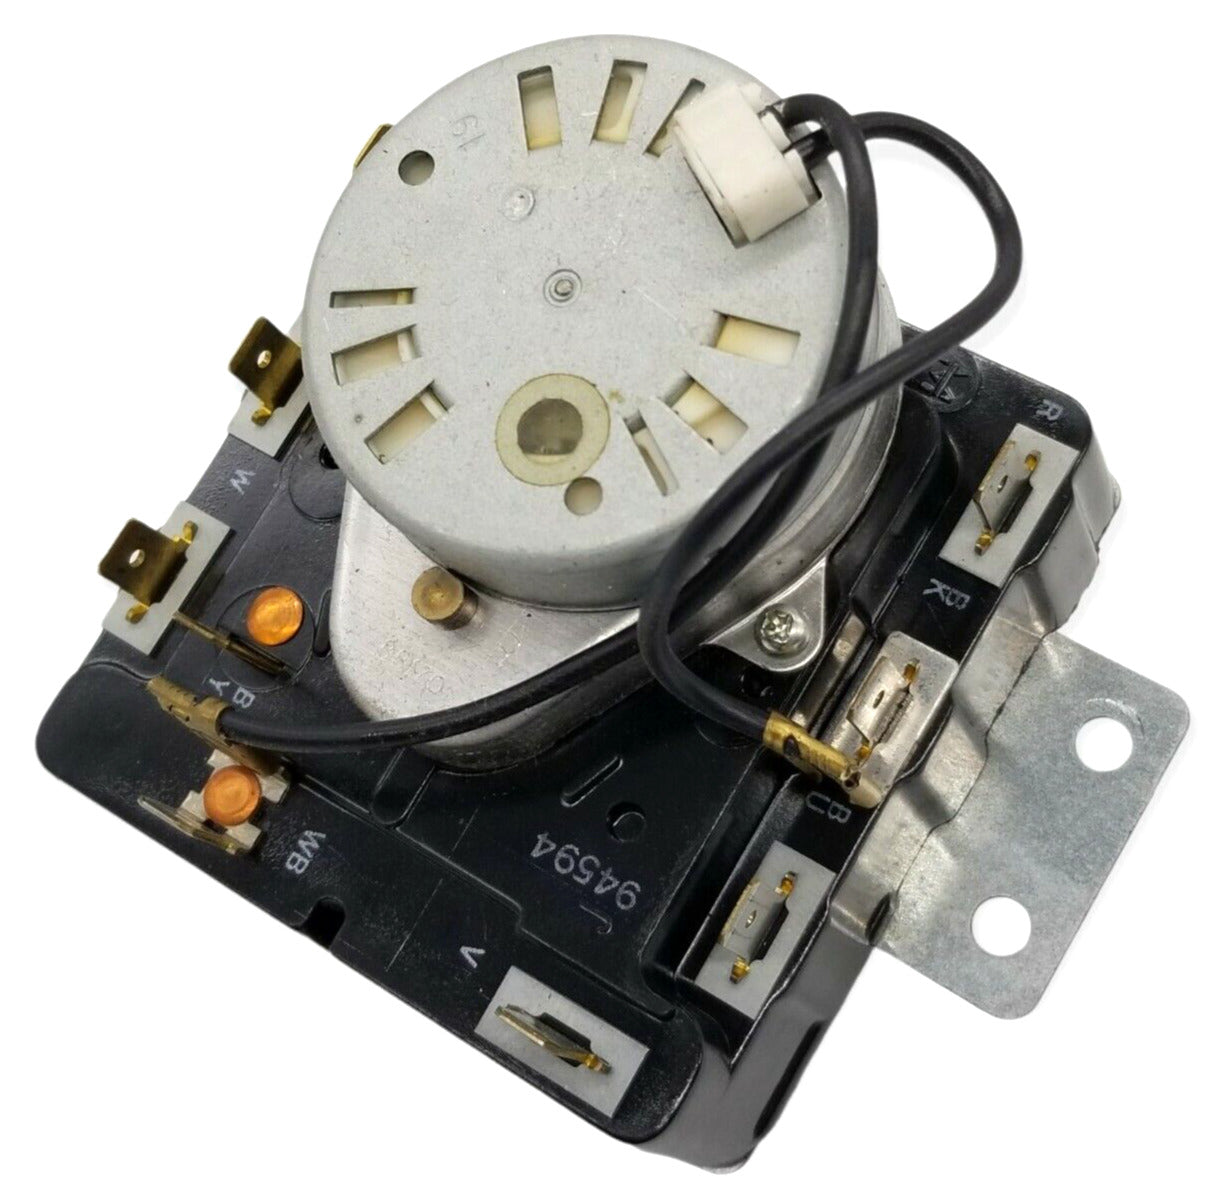 Genuine OEM Replacement for Kenmore Dryer Timer 3406015